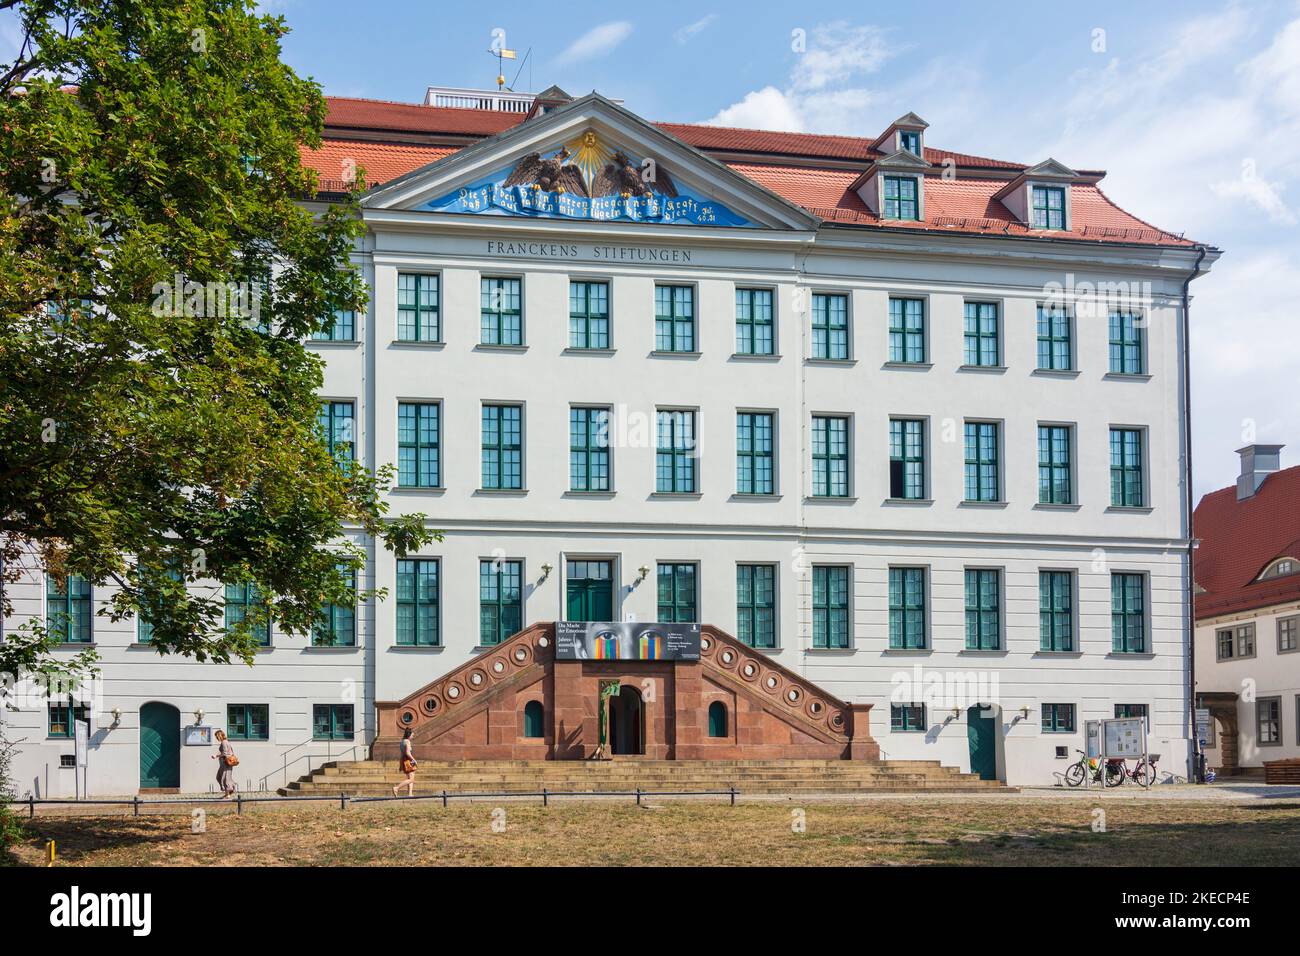 Halle (Saale), Historical orphanage of Franckesche Stiftungen (Francke Foundations) in Saxony-Anhalt, Germany Stock Photo